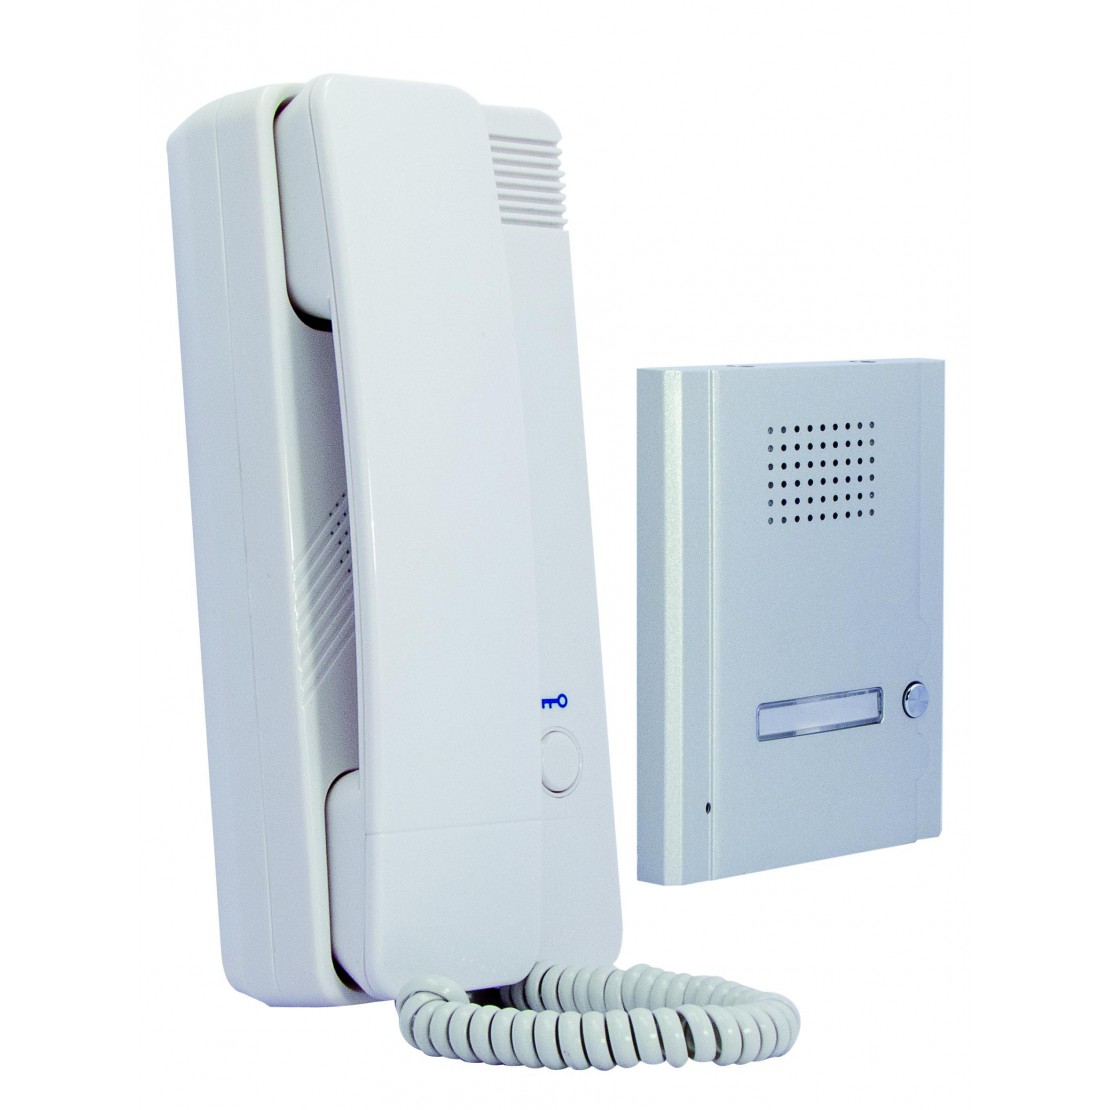 VNS2270 - Intercom Station for commercial, 2-way voice communications